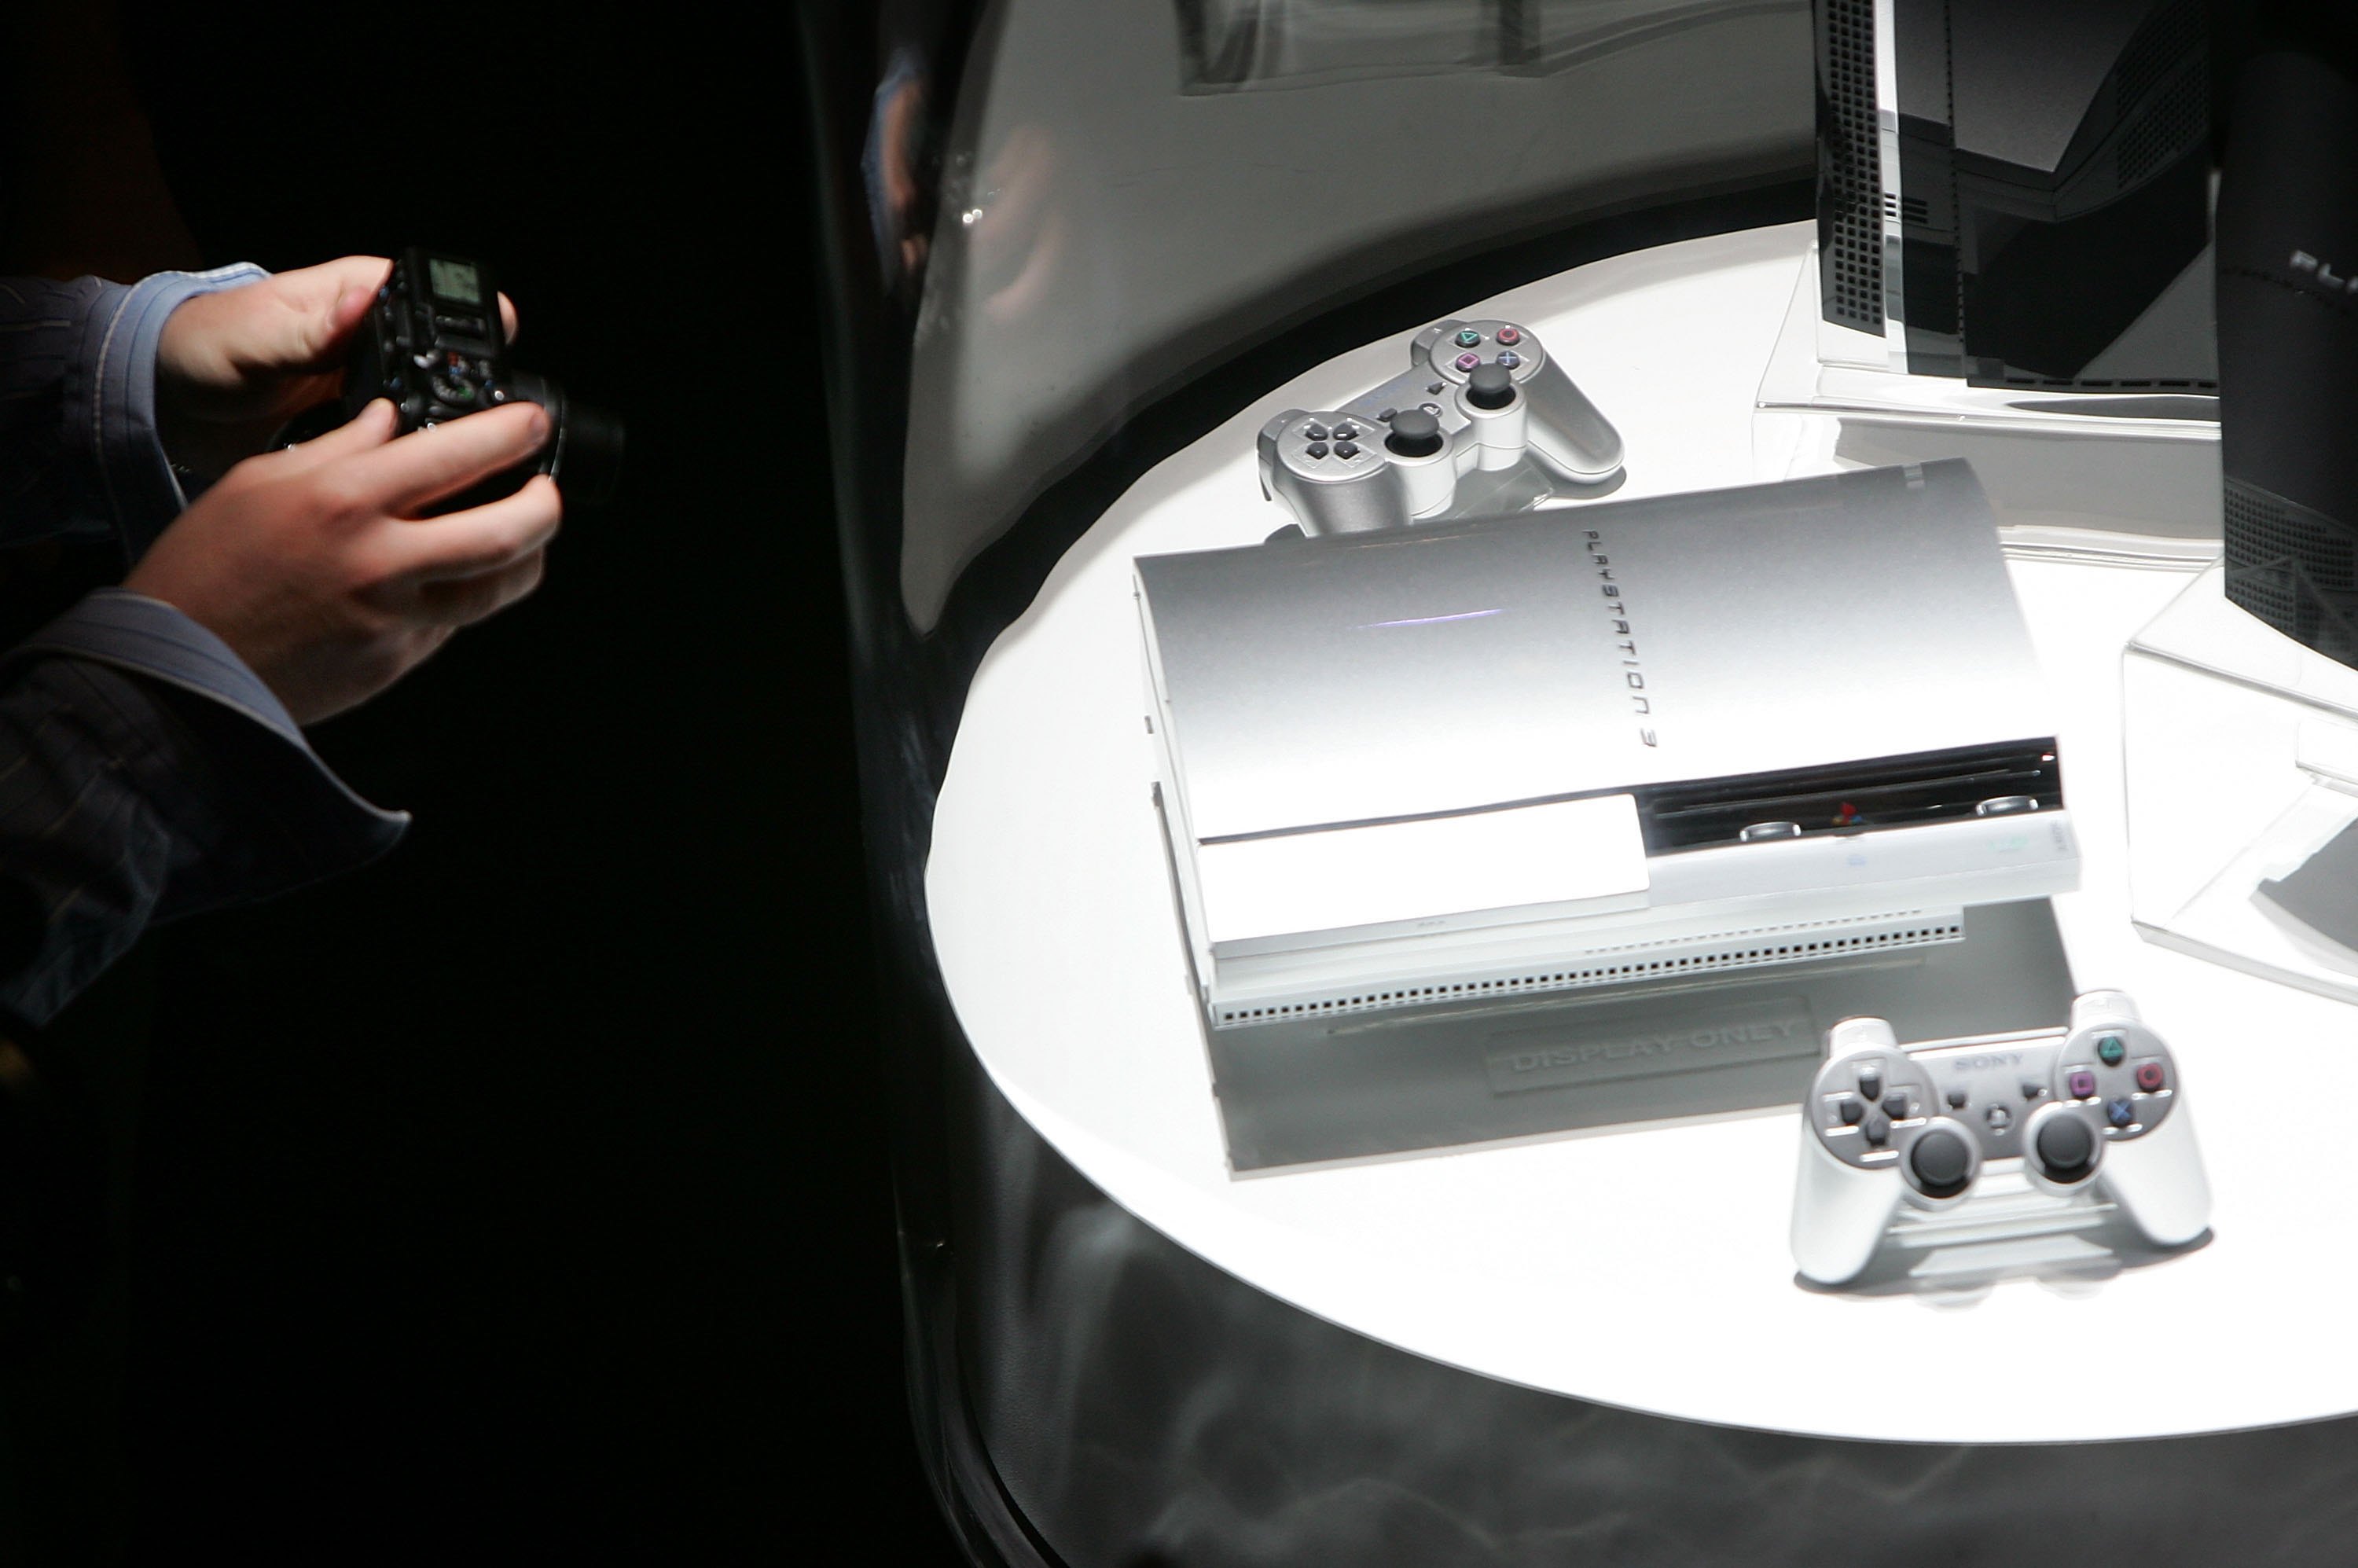 beschermen Maryanne Jones Verbinding Sony has made it nearly impossible to buy PS3 games online | Tom's Guide